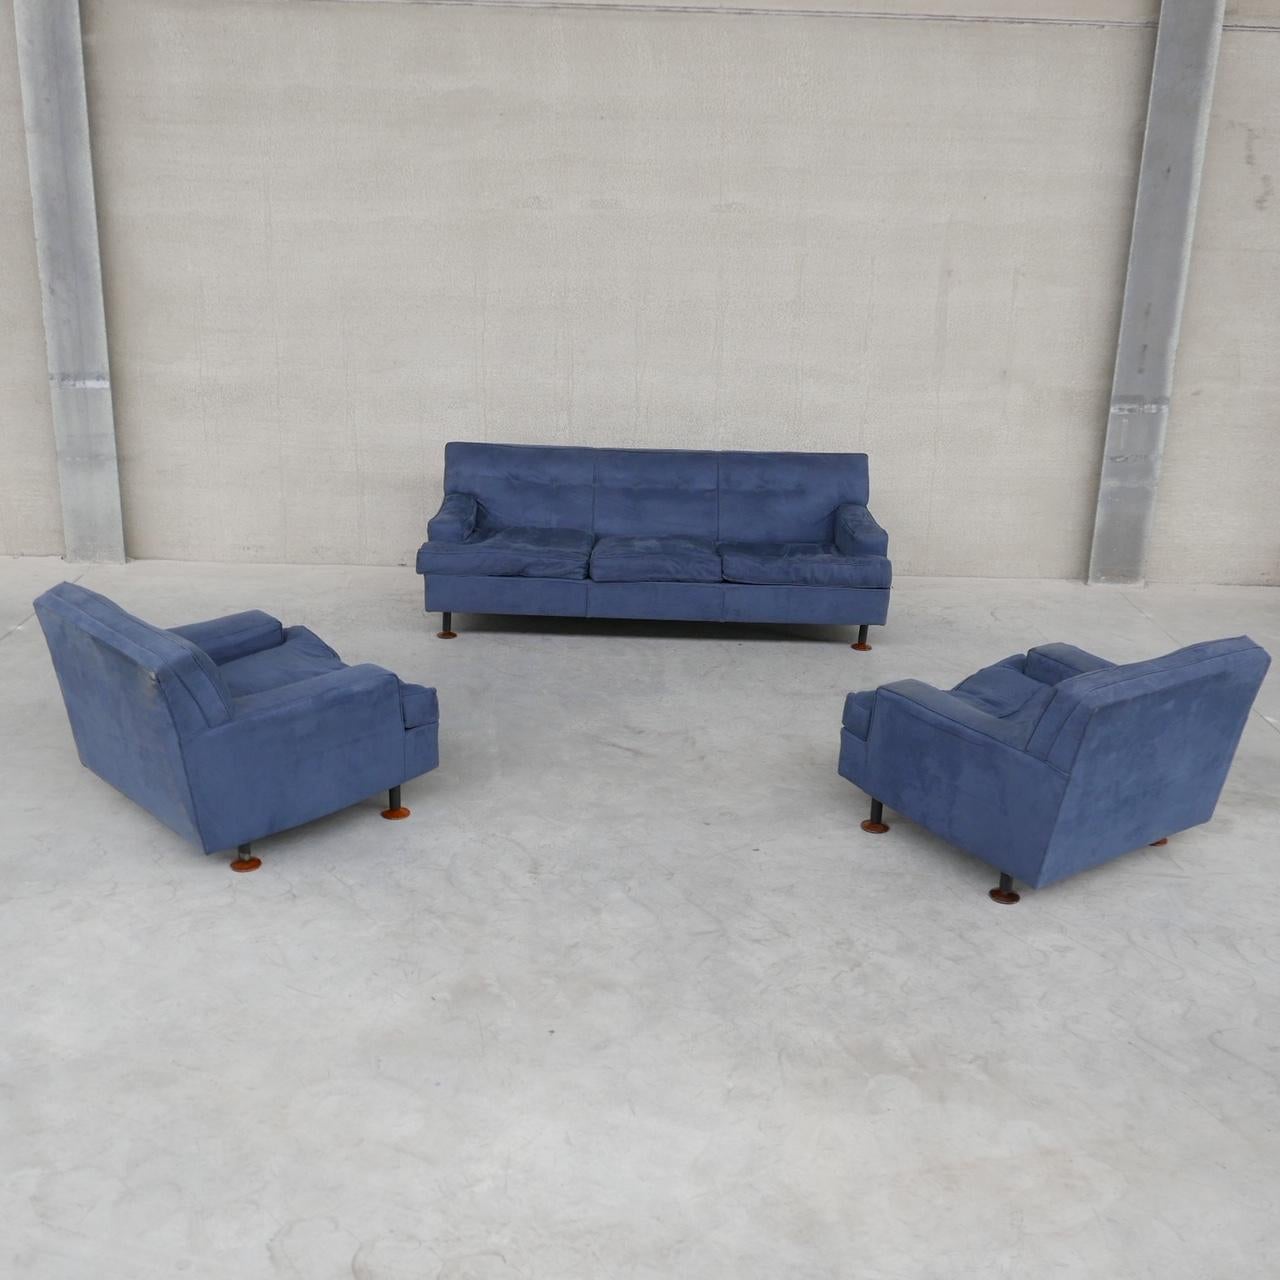 A pair of armchairs and three seater sofa. 

By Marco Zanuso for Arflex. 

Italy, c1962. 

Original upholstery wants updating, priced accordingly. 

Location: Belgium Gallery. 

Dimensions: Armchairs: 81 W x 80 D x 37 Seat Height x 66